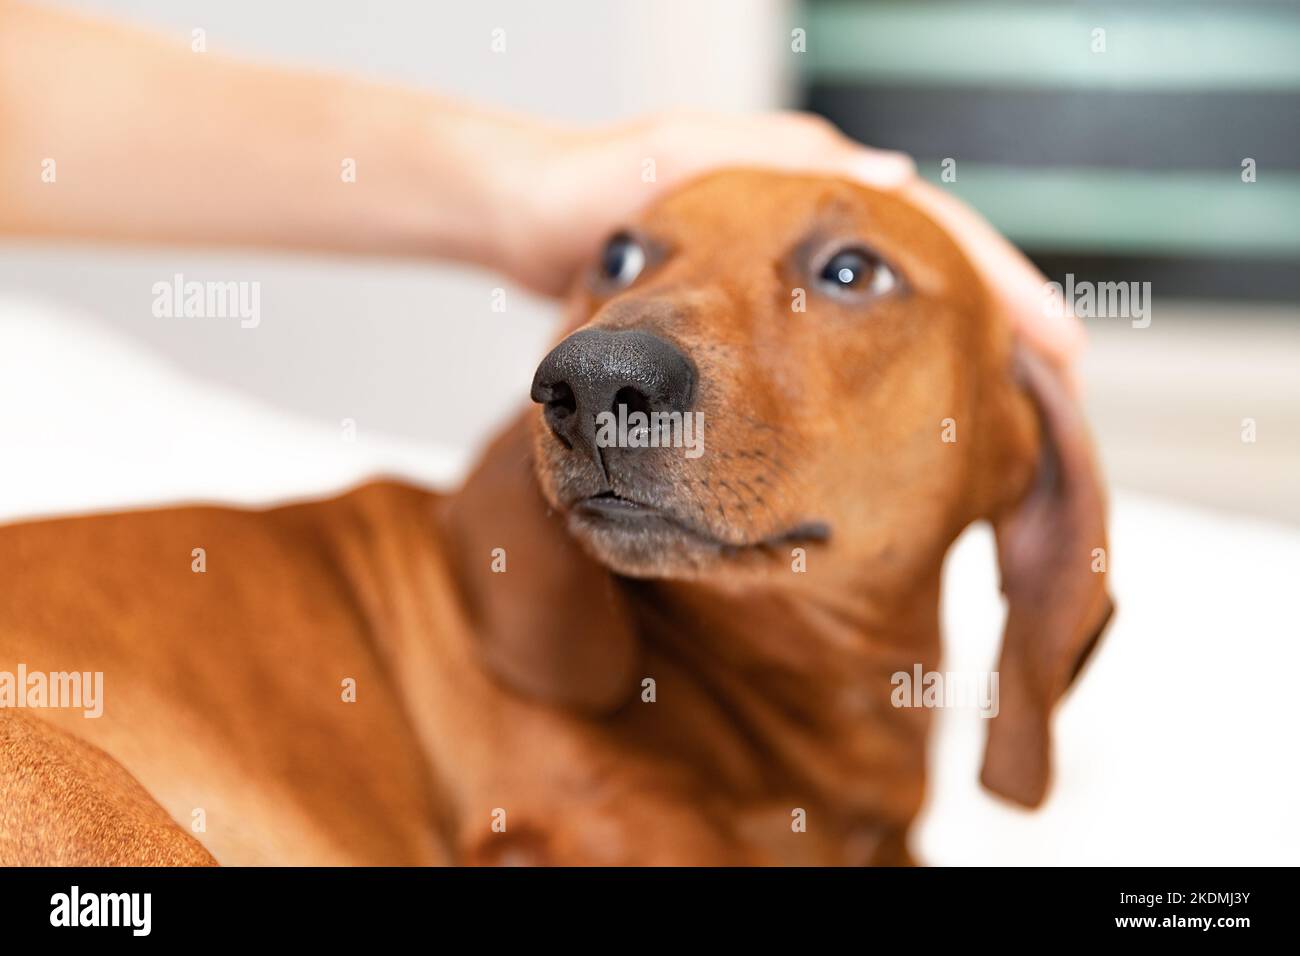 The dachshund dog with funny snout on the bed in the room Stock Photo